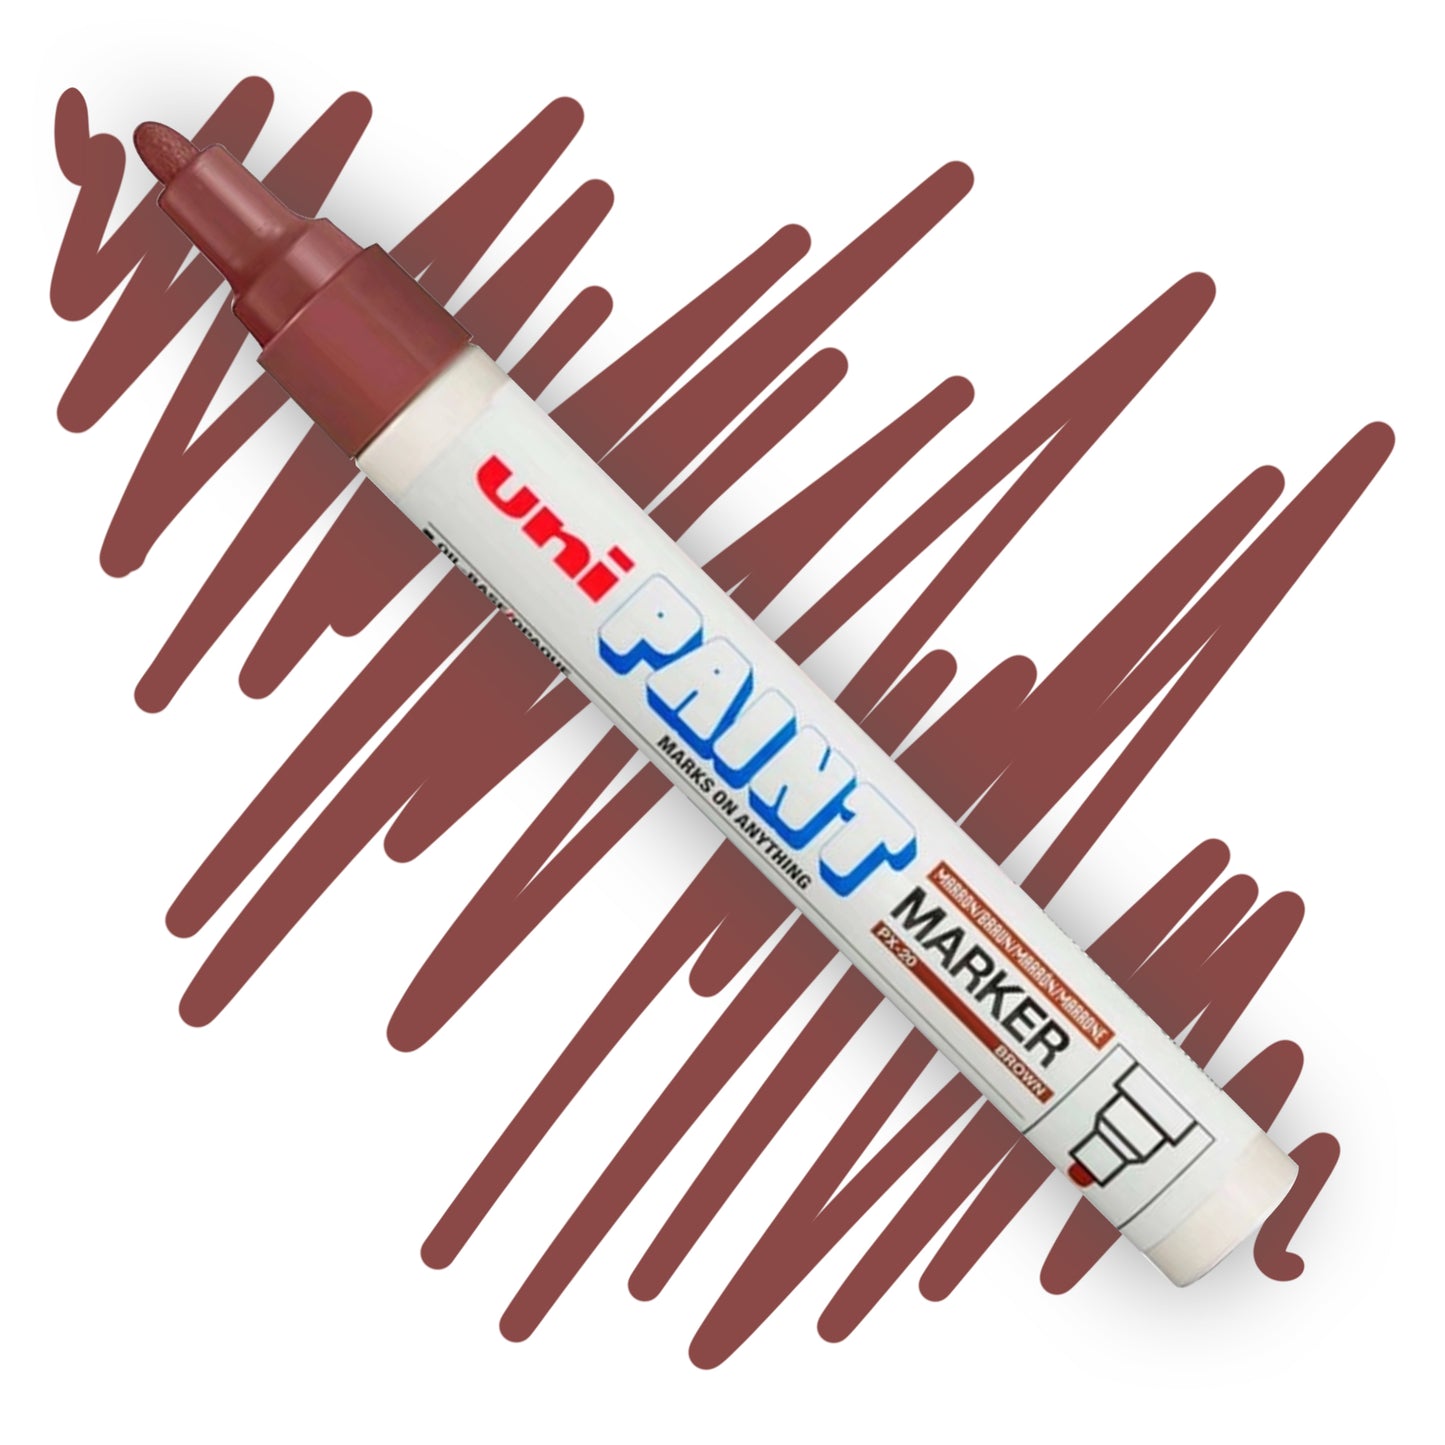 A white marker angled diagonally, the tip of the marker and the nib are colored brown. On the marker body the label reads "Uni PAINT Maker". Behind the marker is a color swatch of a squiggly line in brown.